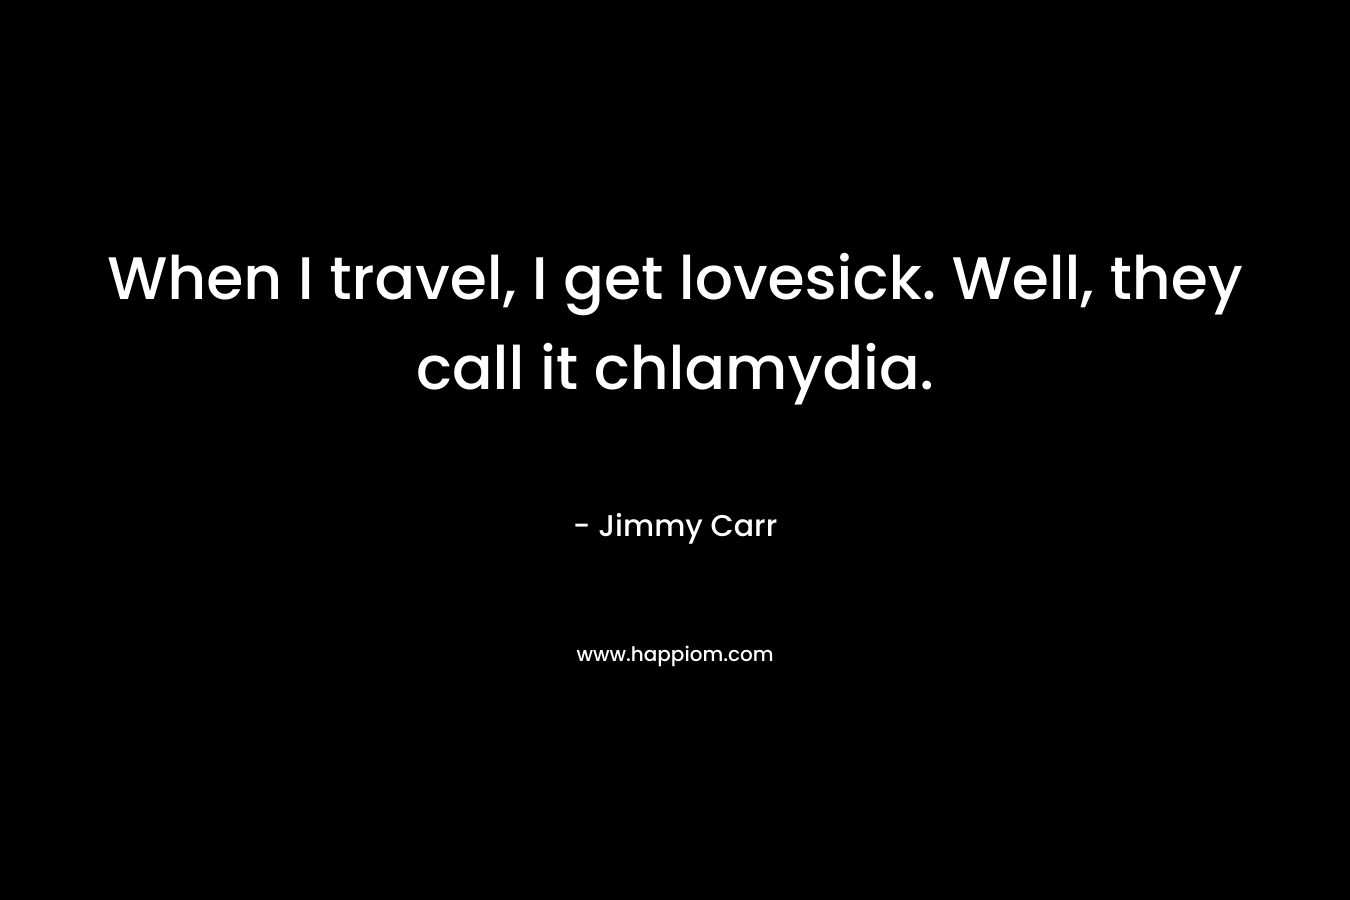 When I travel, I get lovesick. Well, they call it chlamydia. – Jimmy Carr